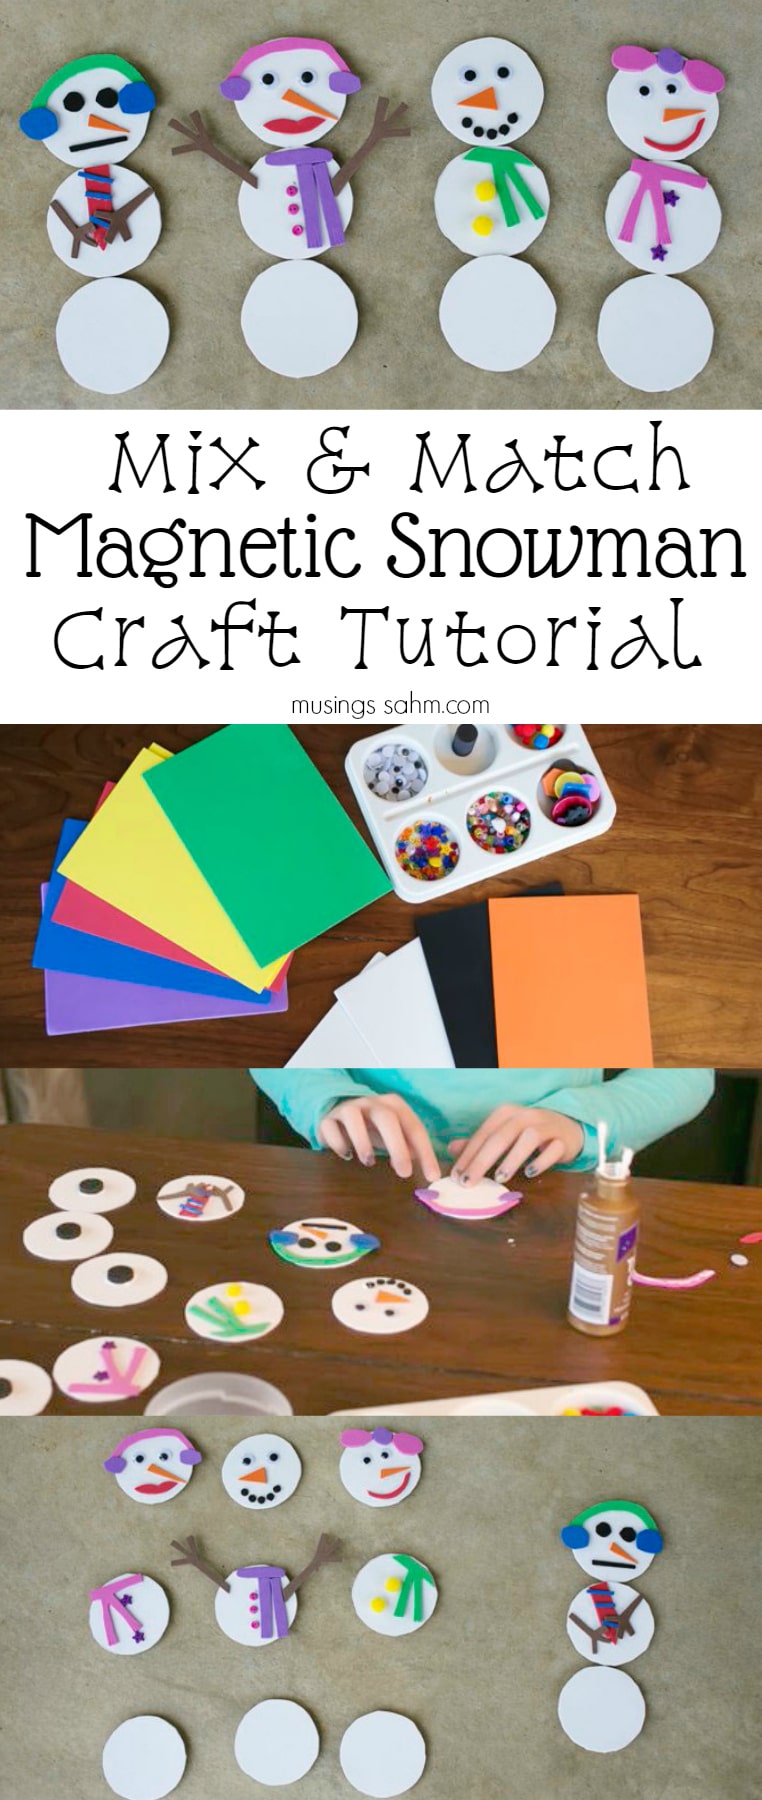 Mix and Match Magnetic Snowman Craft Tutorial